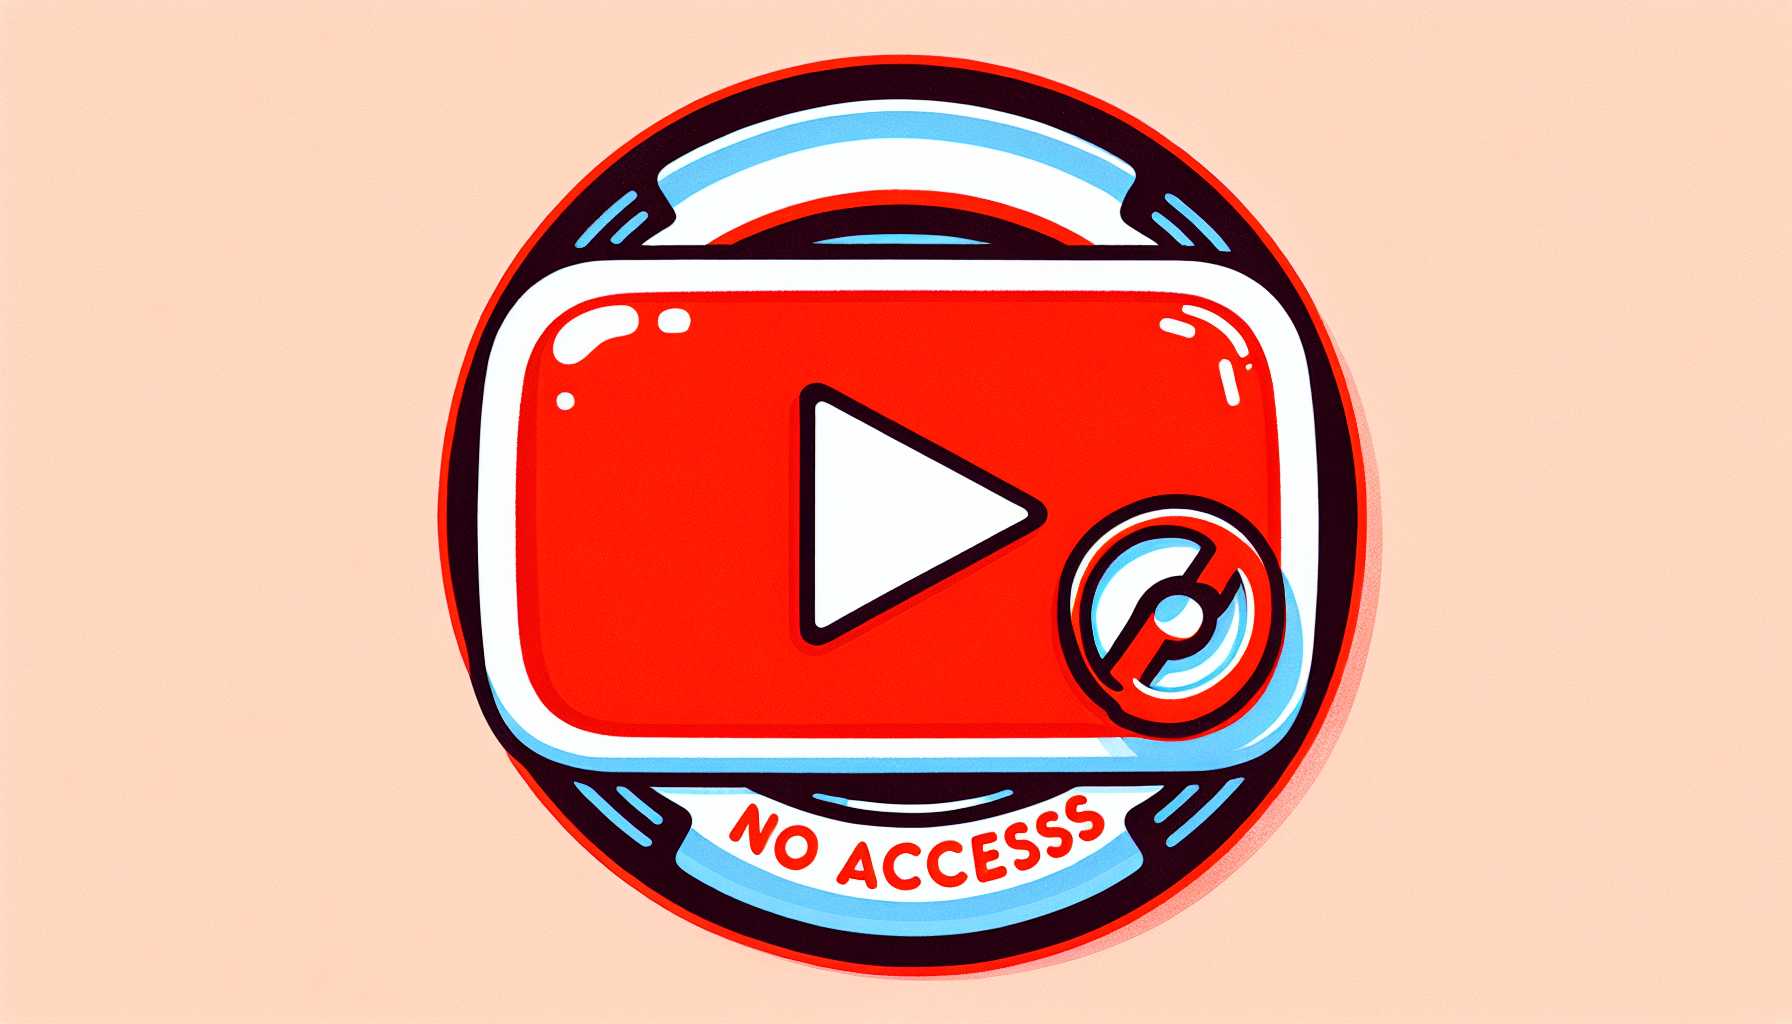 YouTube's logo with a 'no access' sign directed at OpenAI